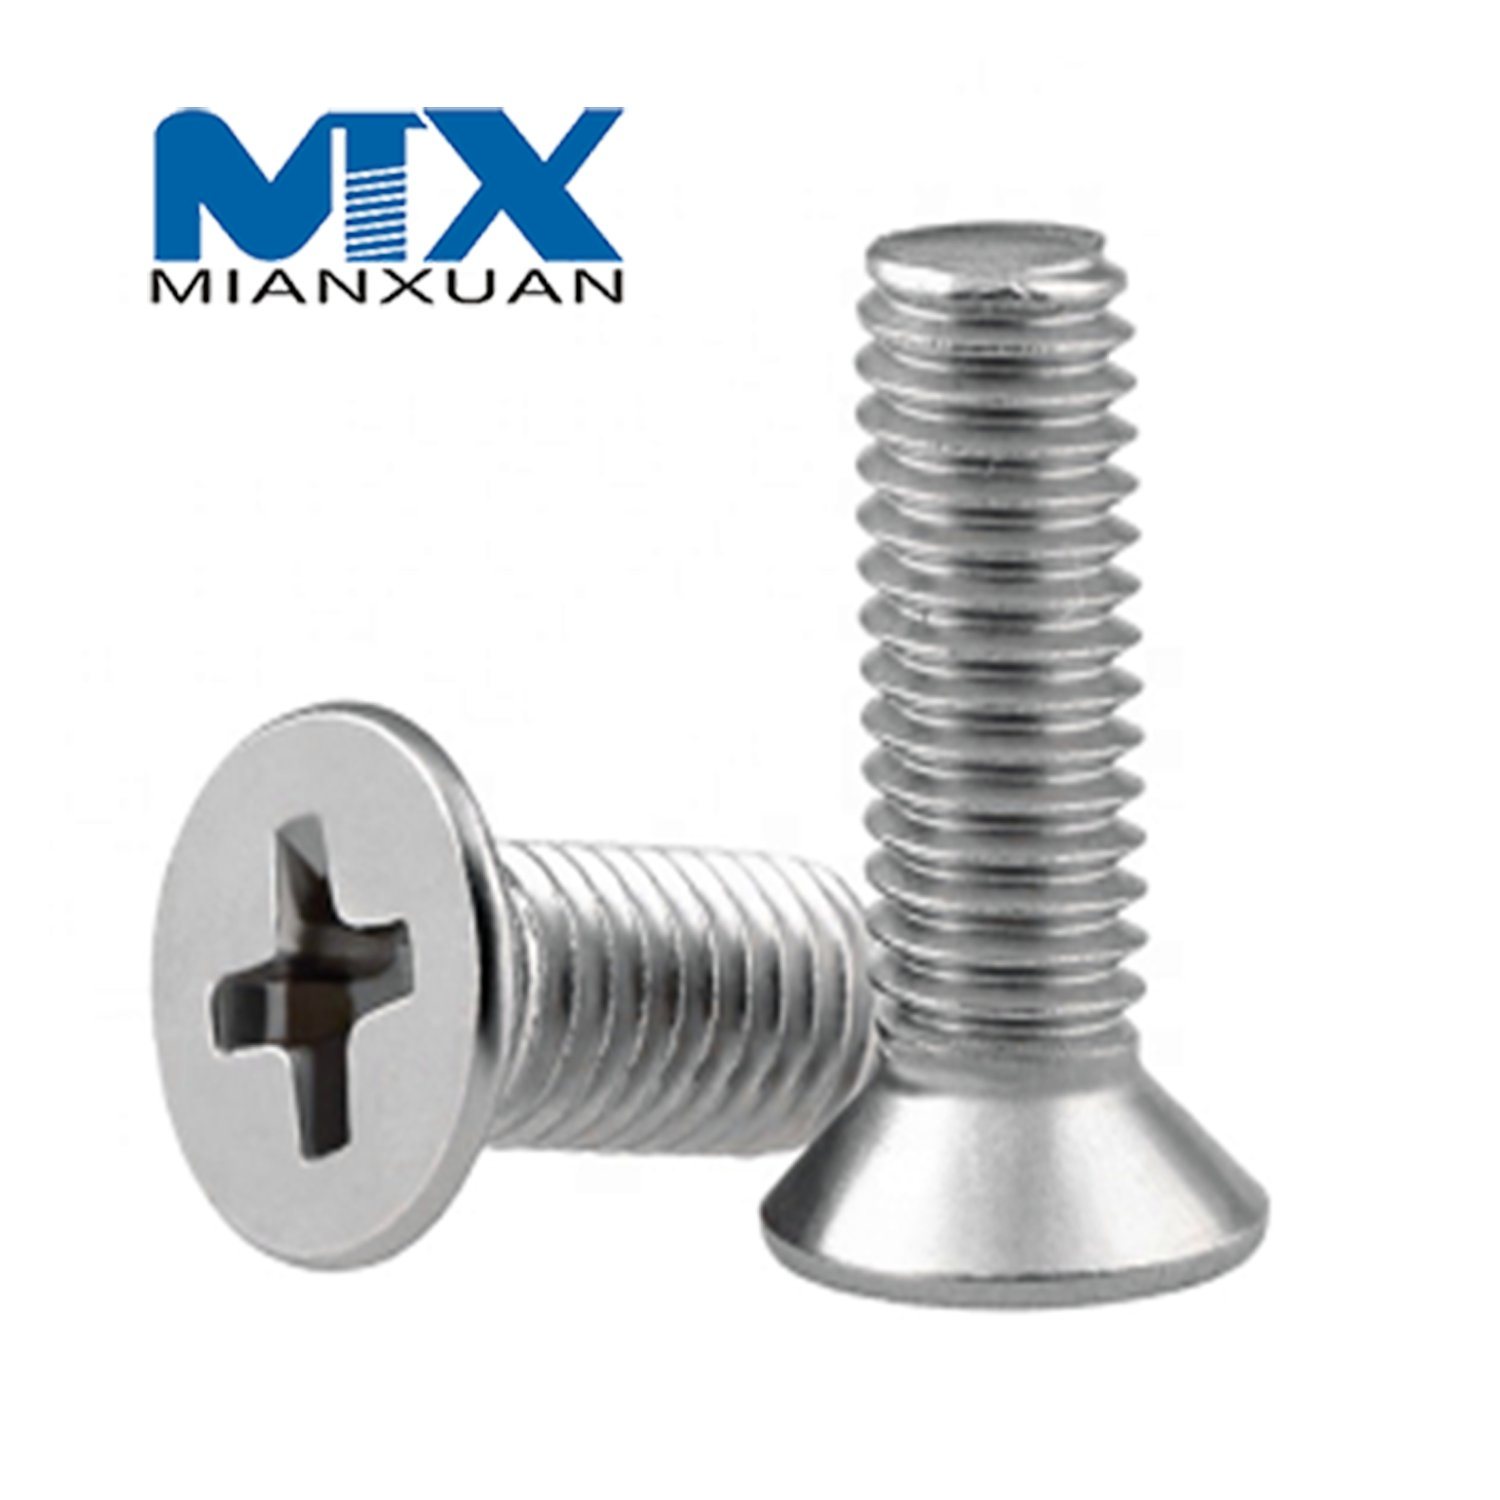 ISO14583 Screw Stainless Steel Standard Manufacturer A2 A4 18-8